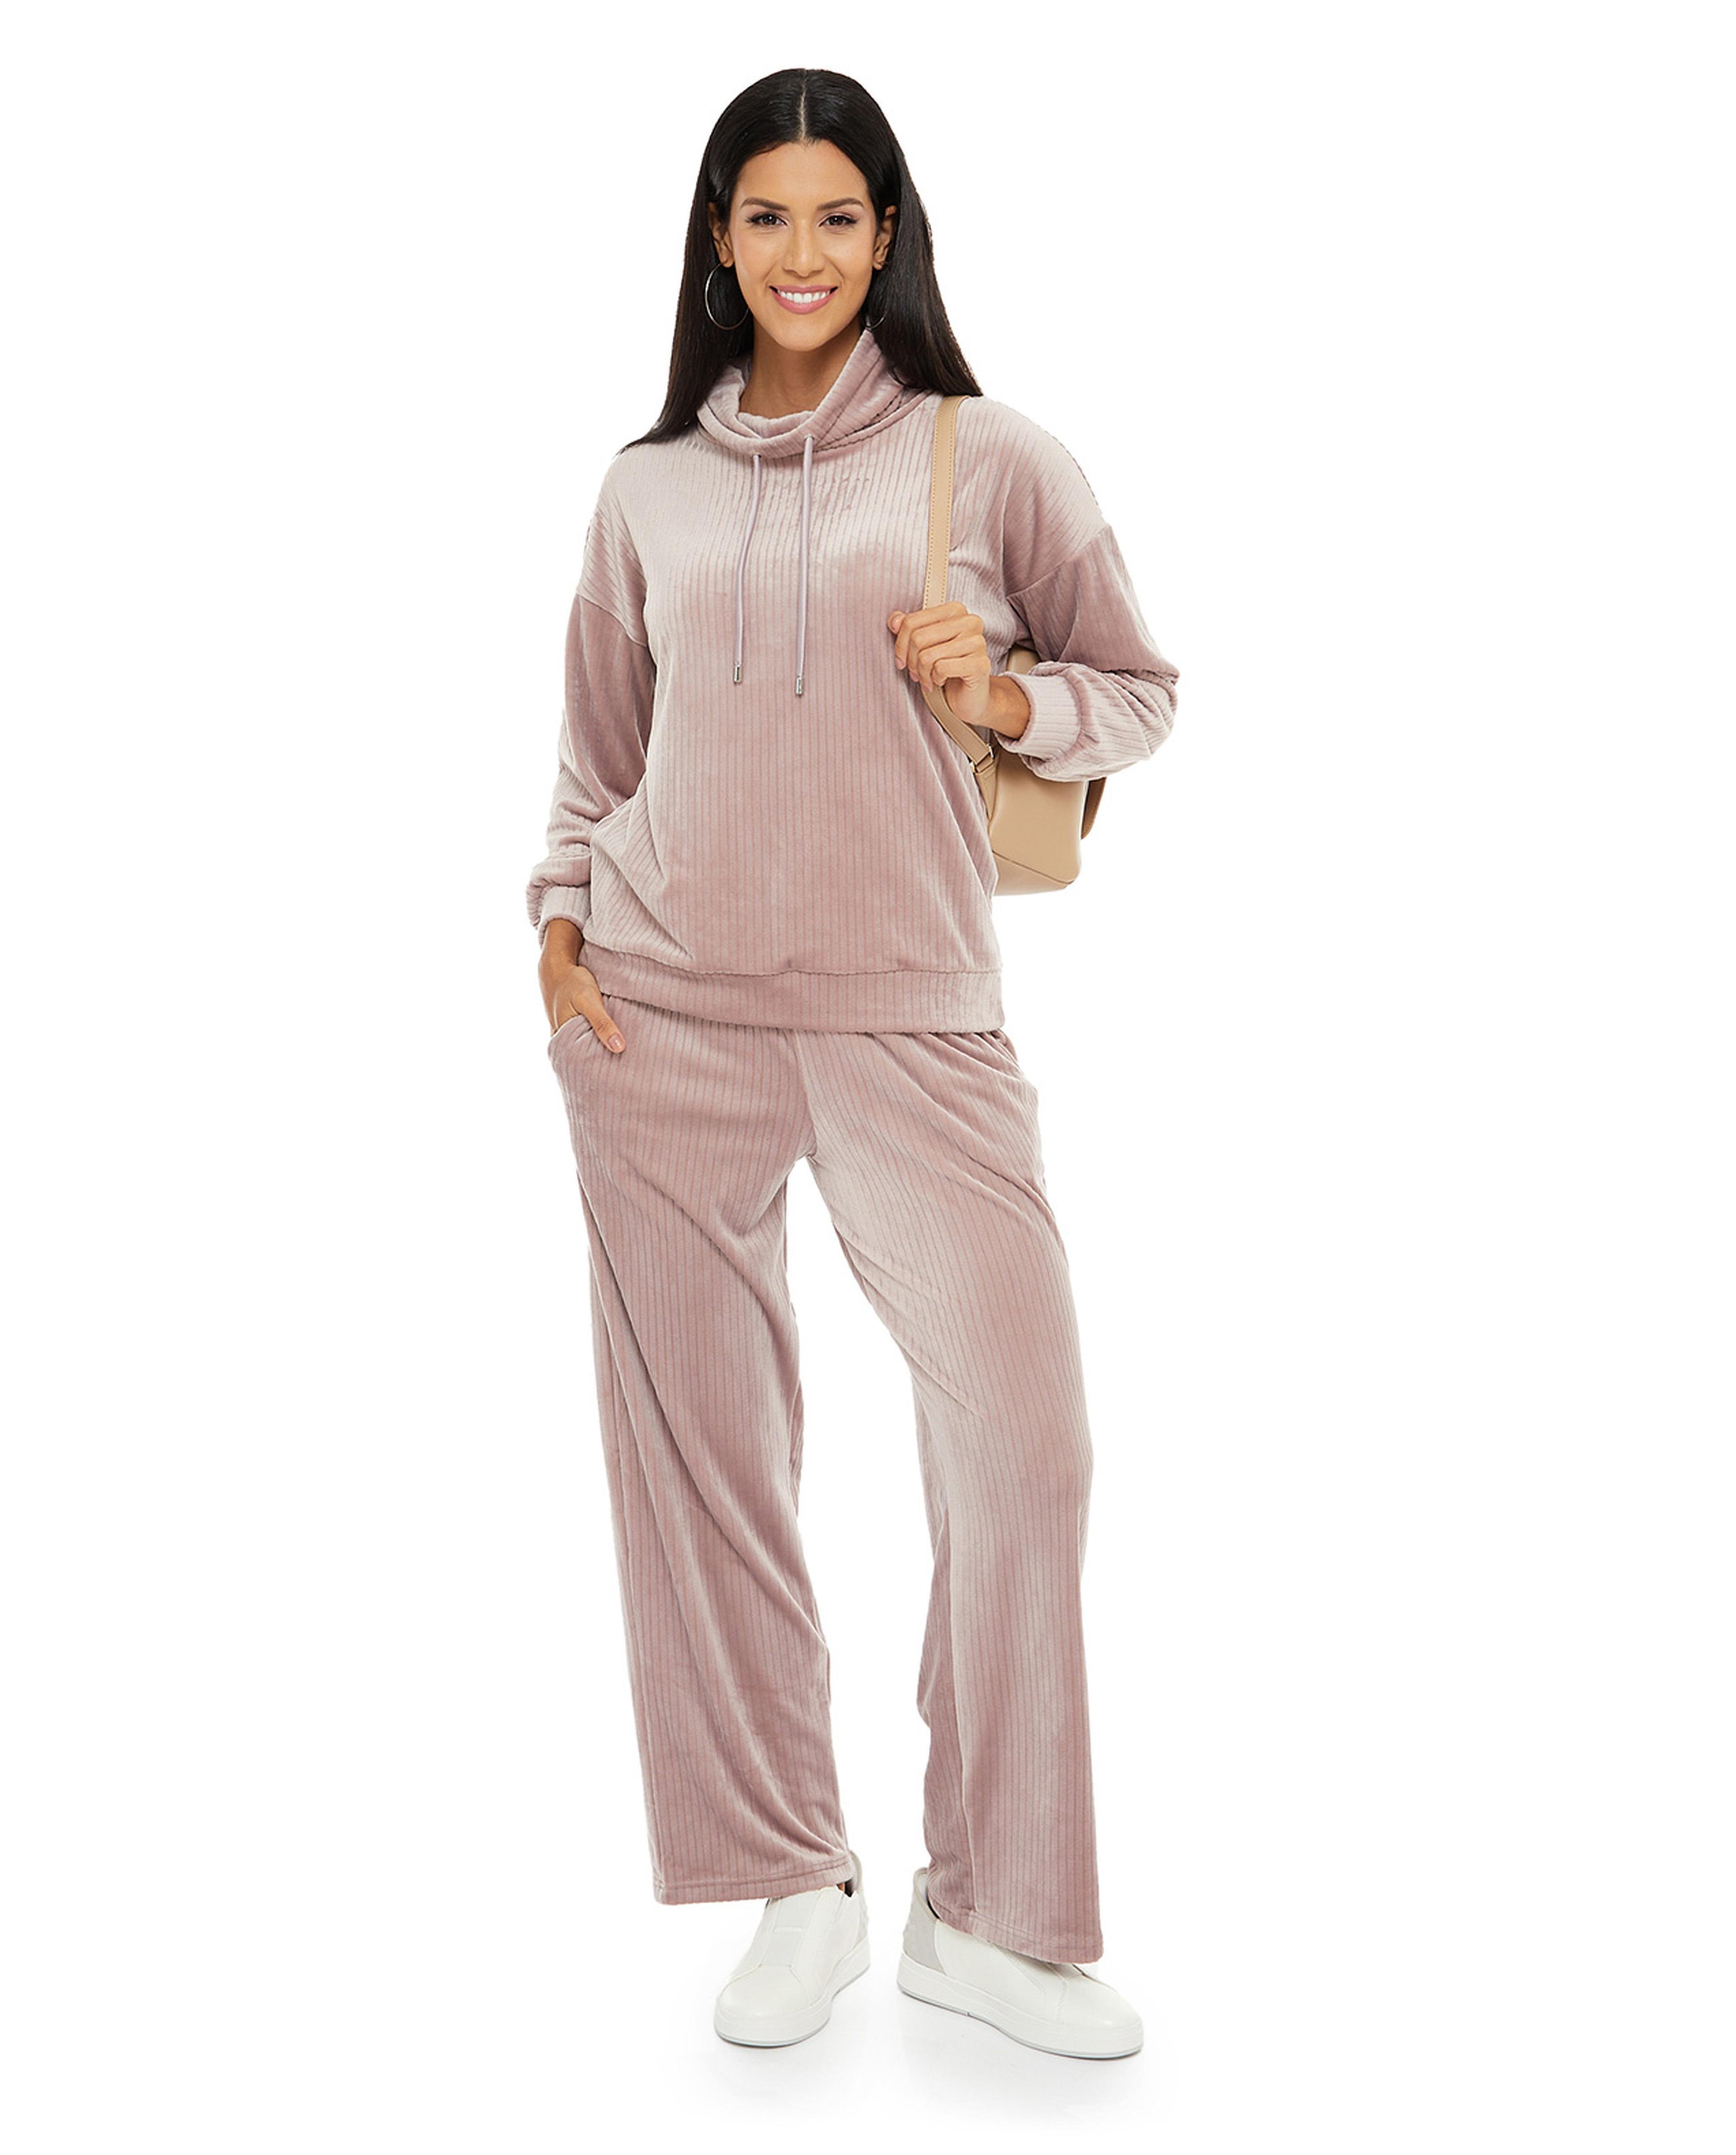 Solid Sleep Top with High Neck and Long Sleeves